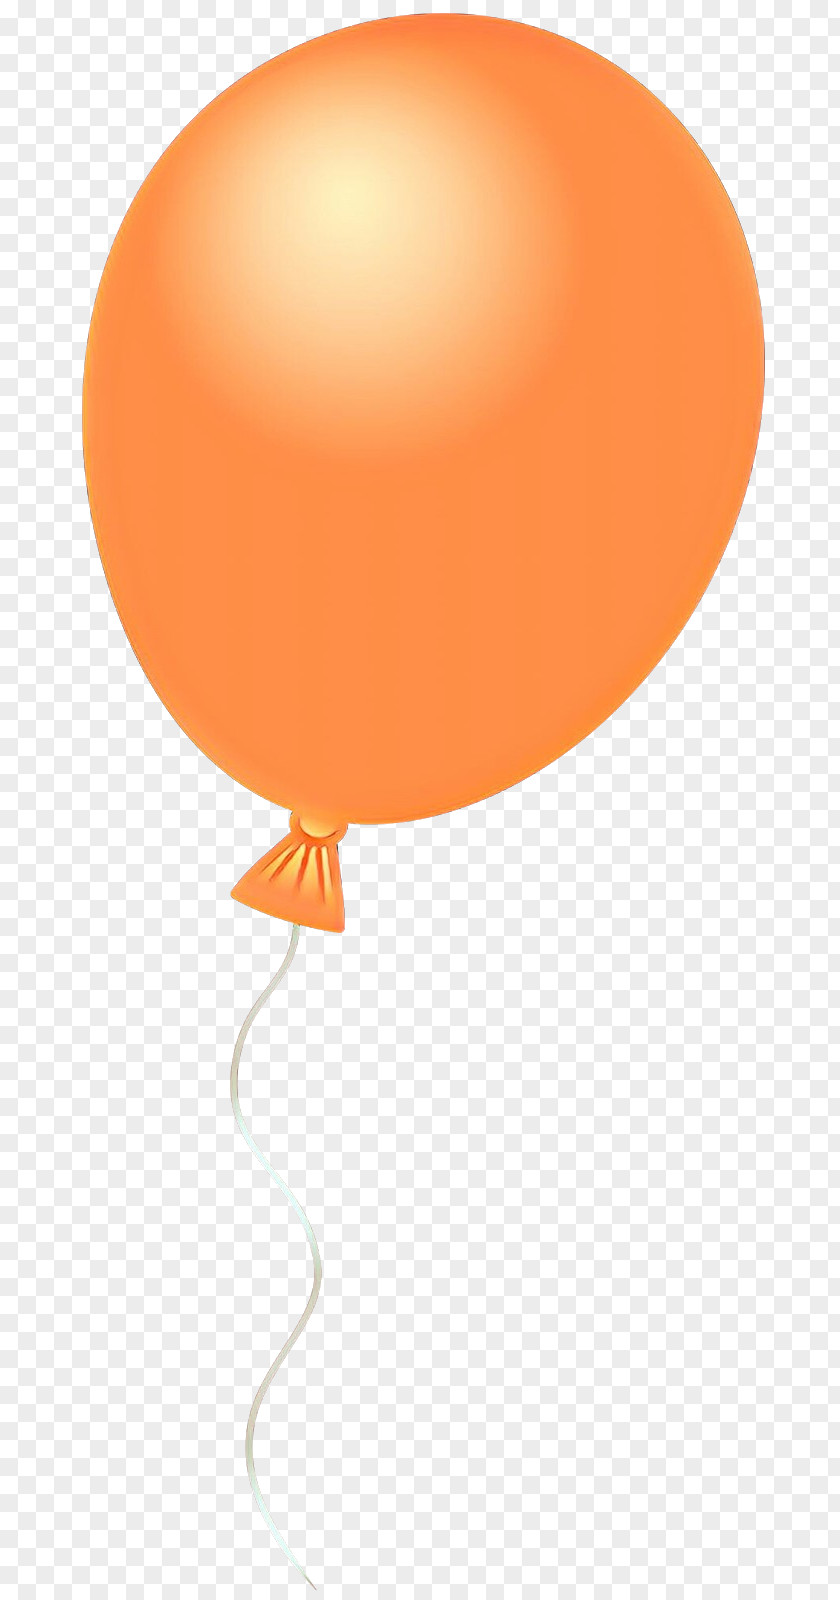 Product Design Balloon Orange S.A. PNG